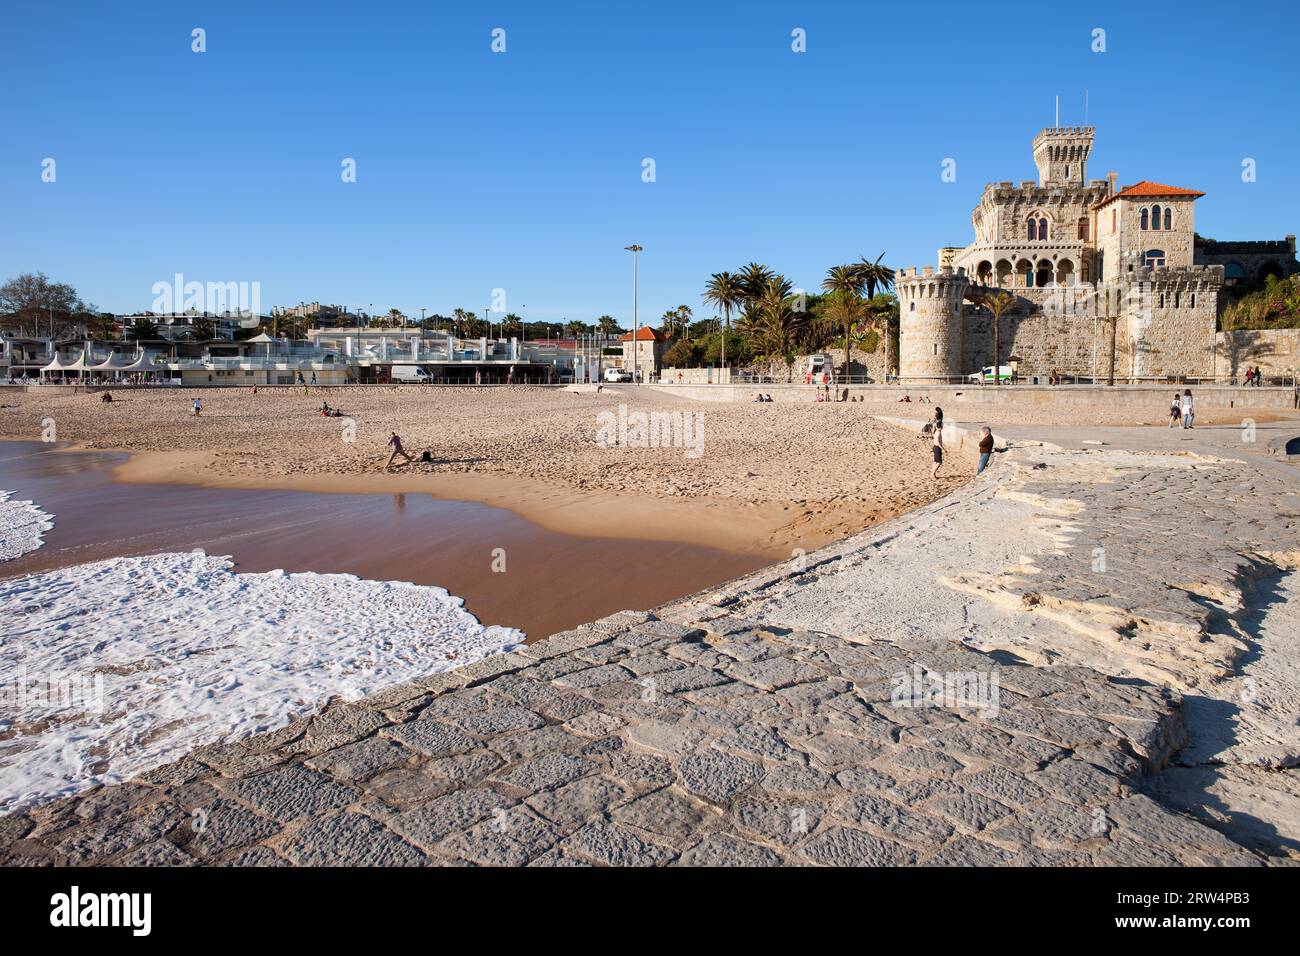 Resort town of Estoril in Portugal, castle, pier and sandy beach by the Atlantic Ocean Stock Photo